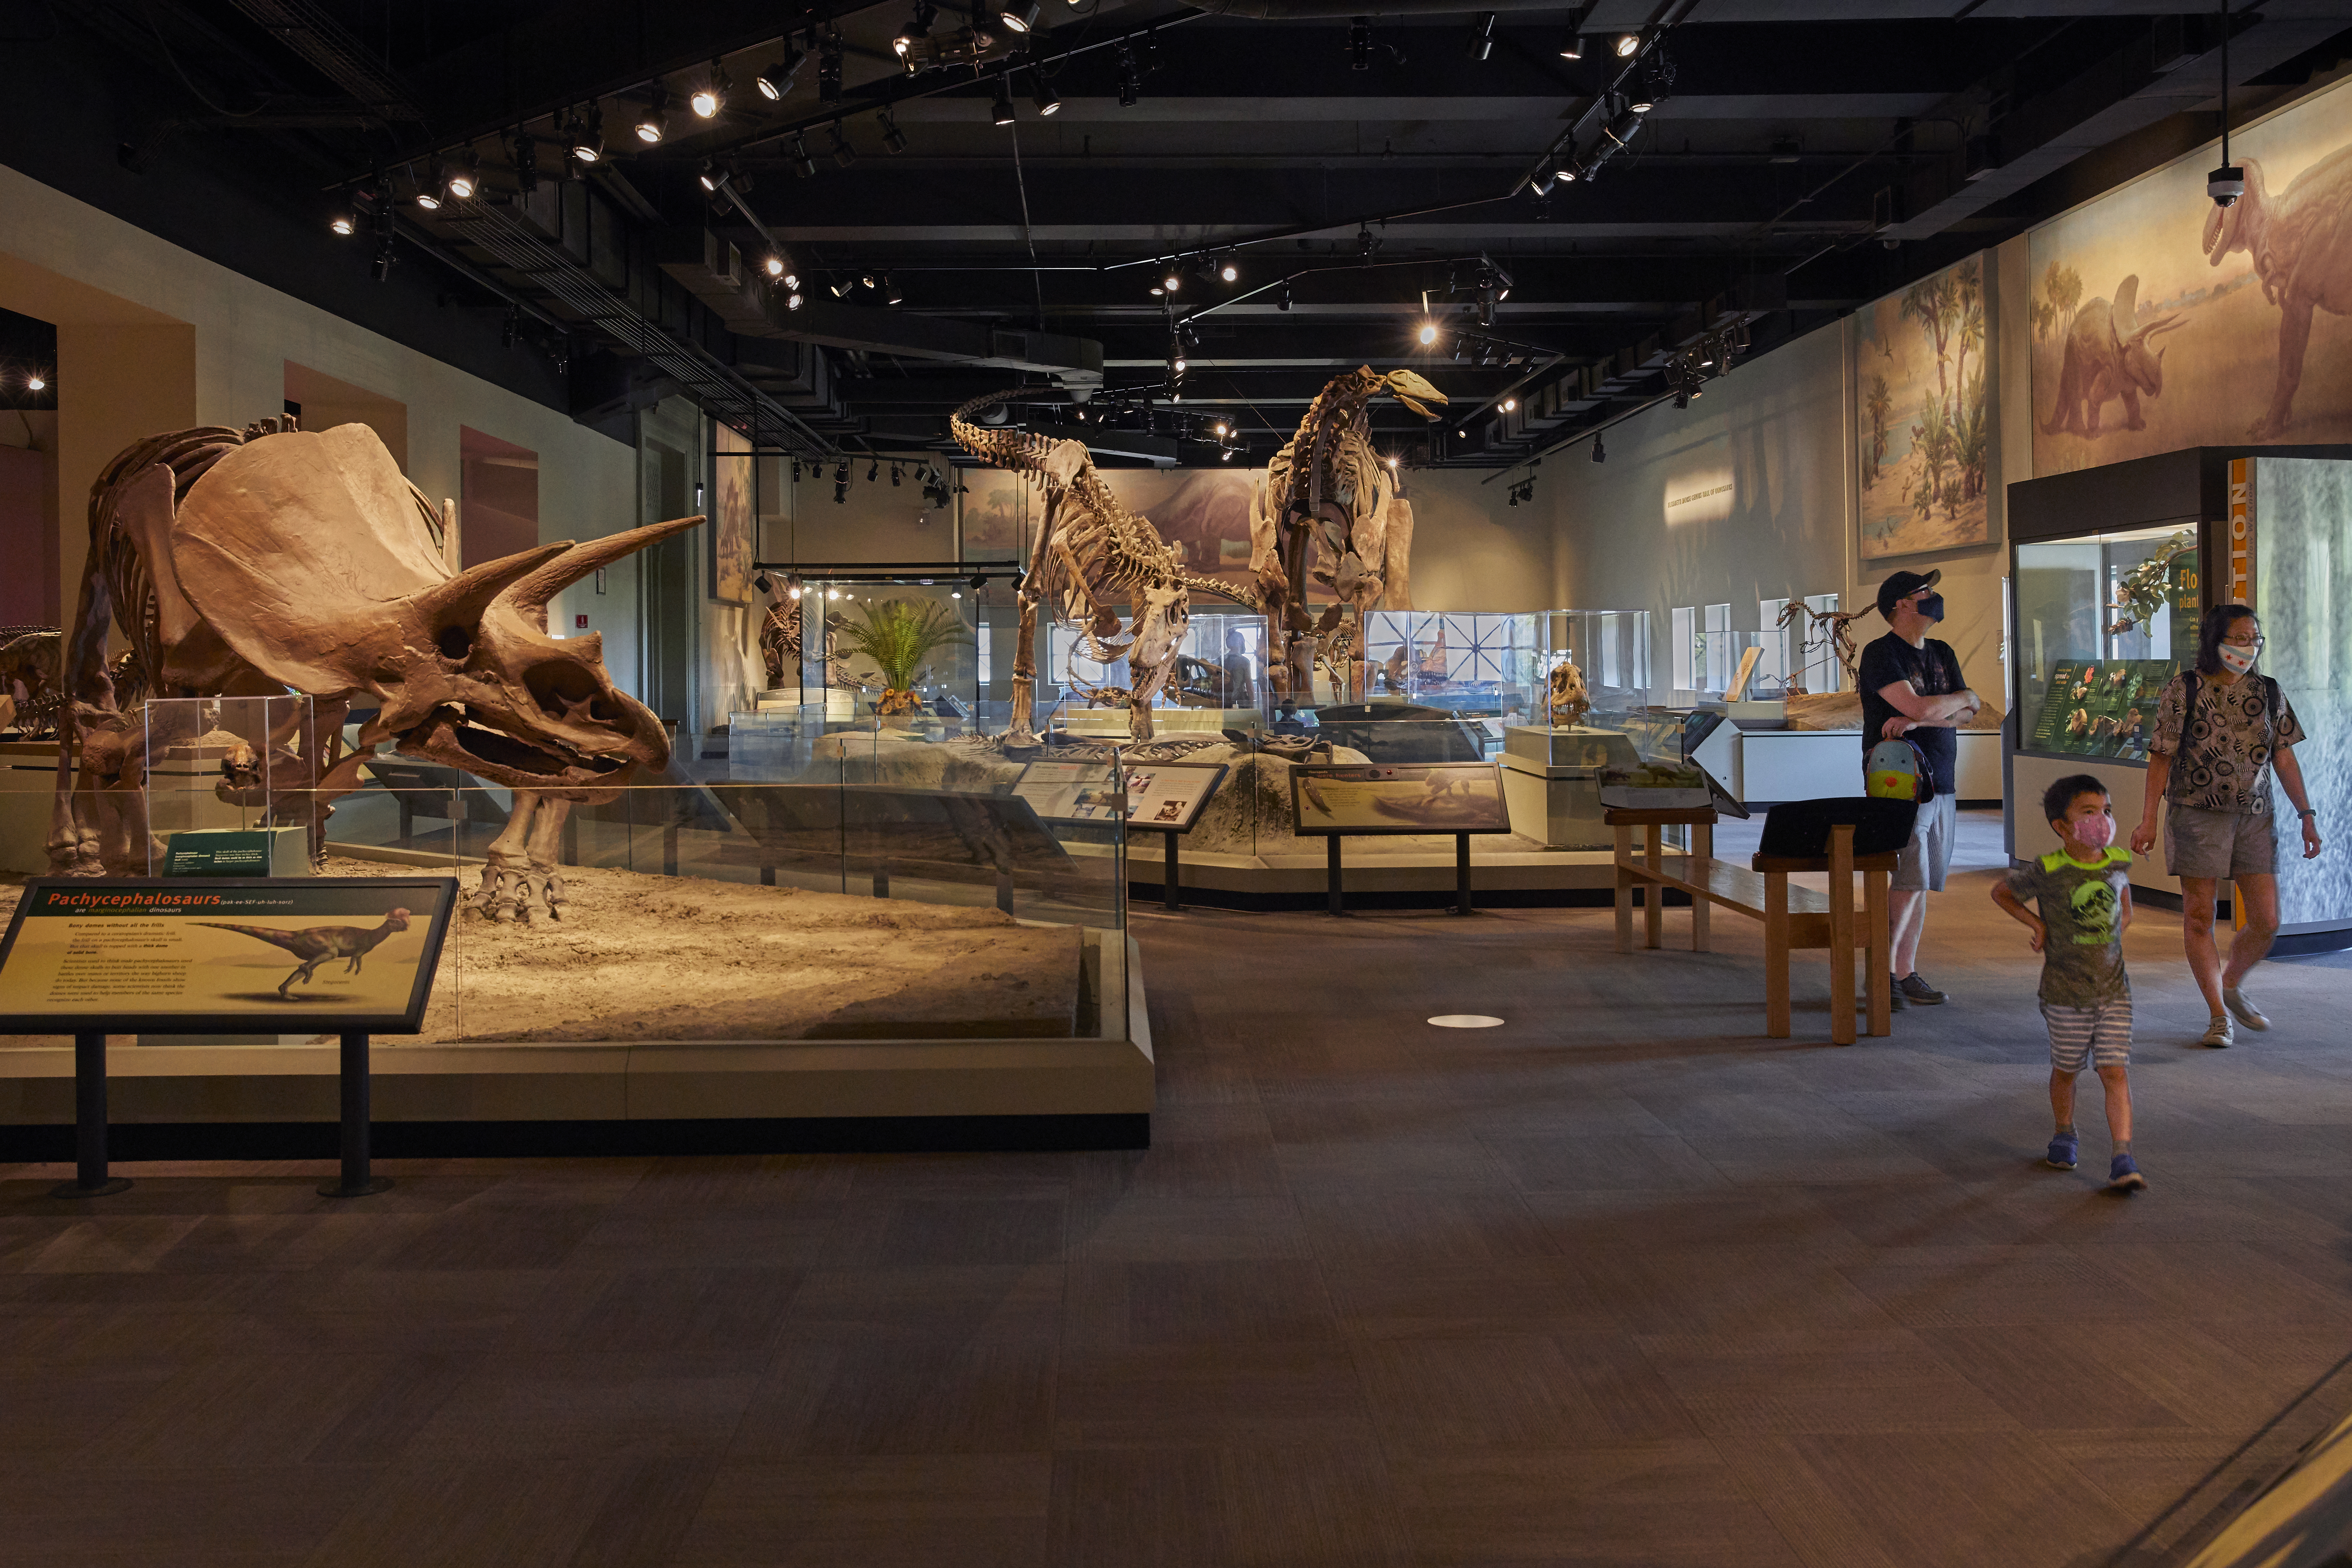 Dinosaur fossils in an exhibitions hall, with three guests walking through